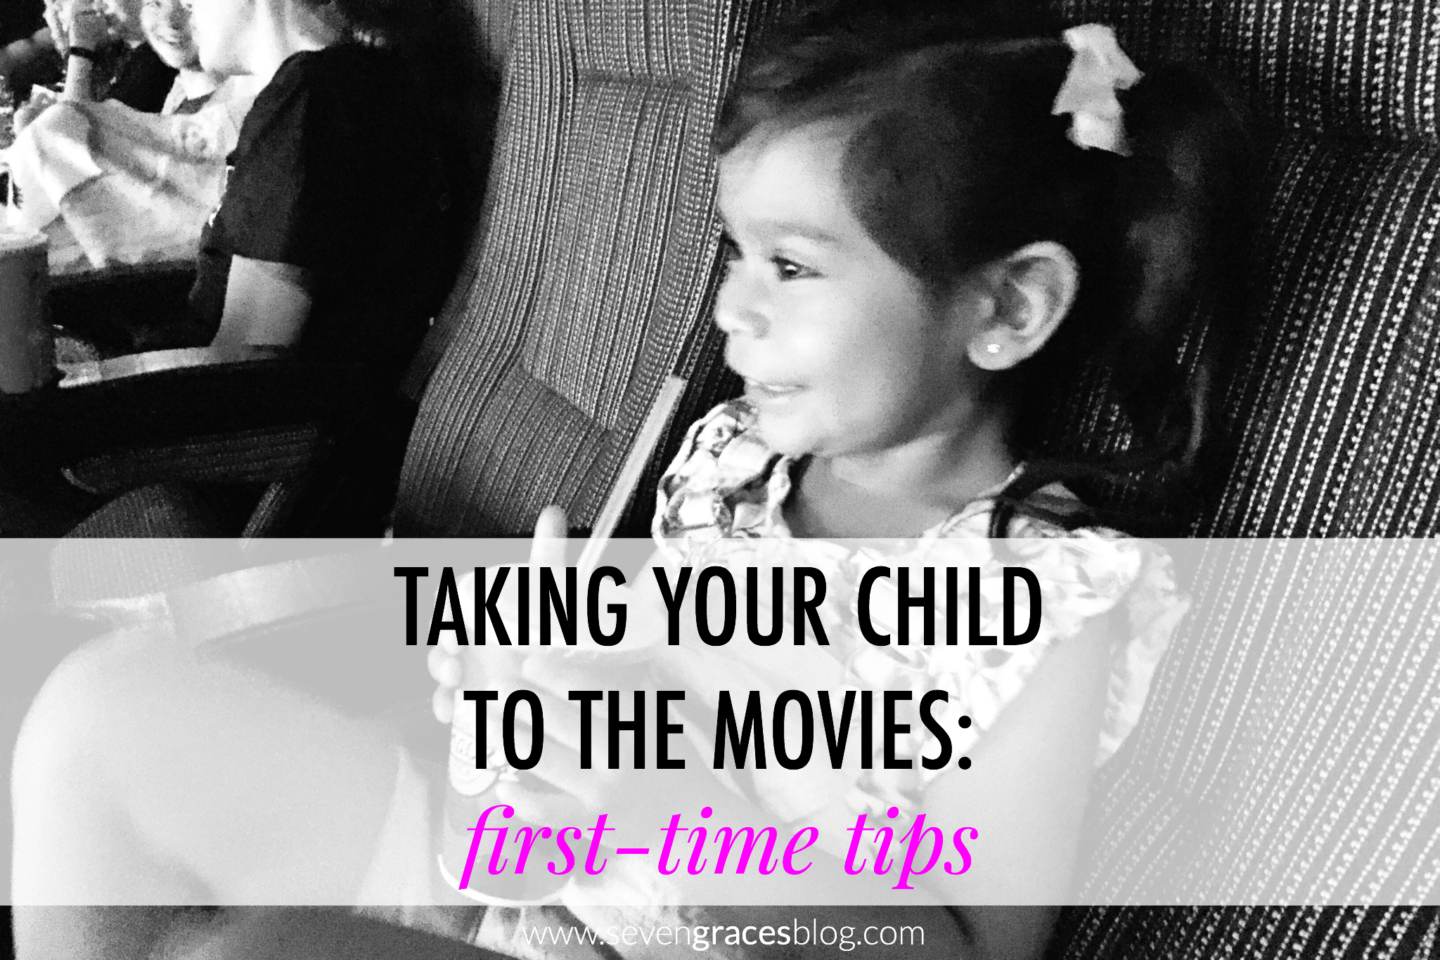 Taking Your Child to the Movies: First-Time Tips